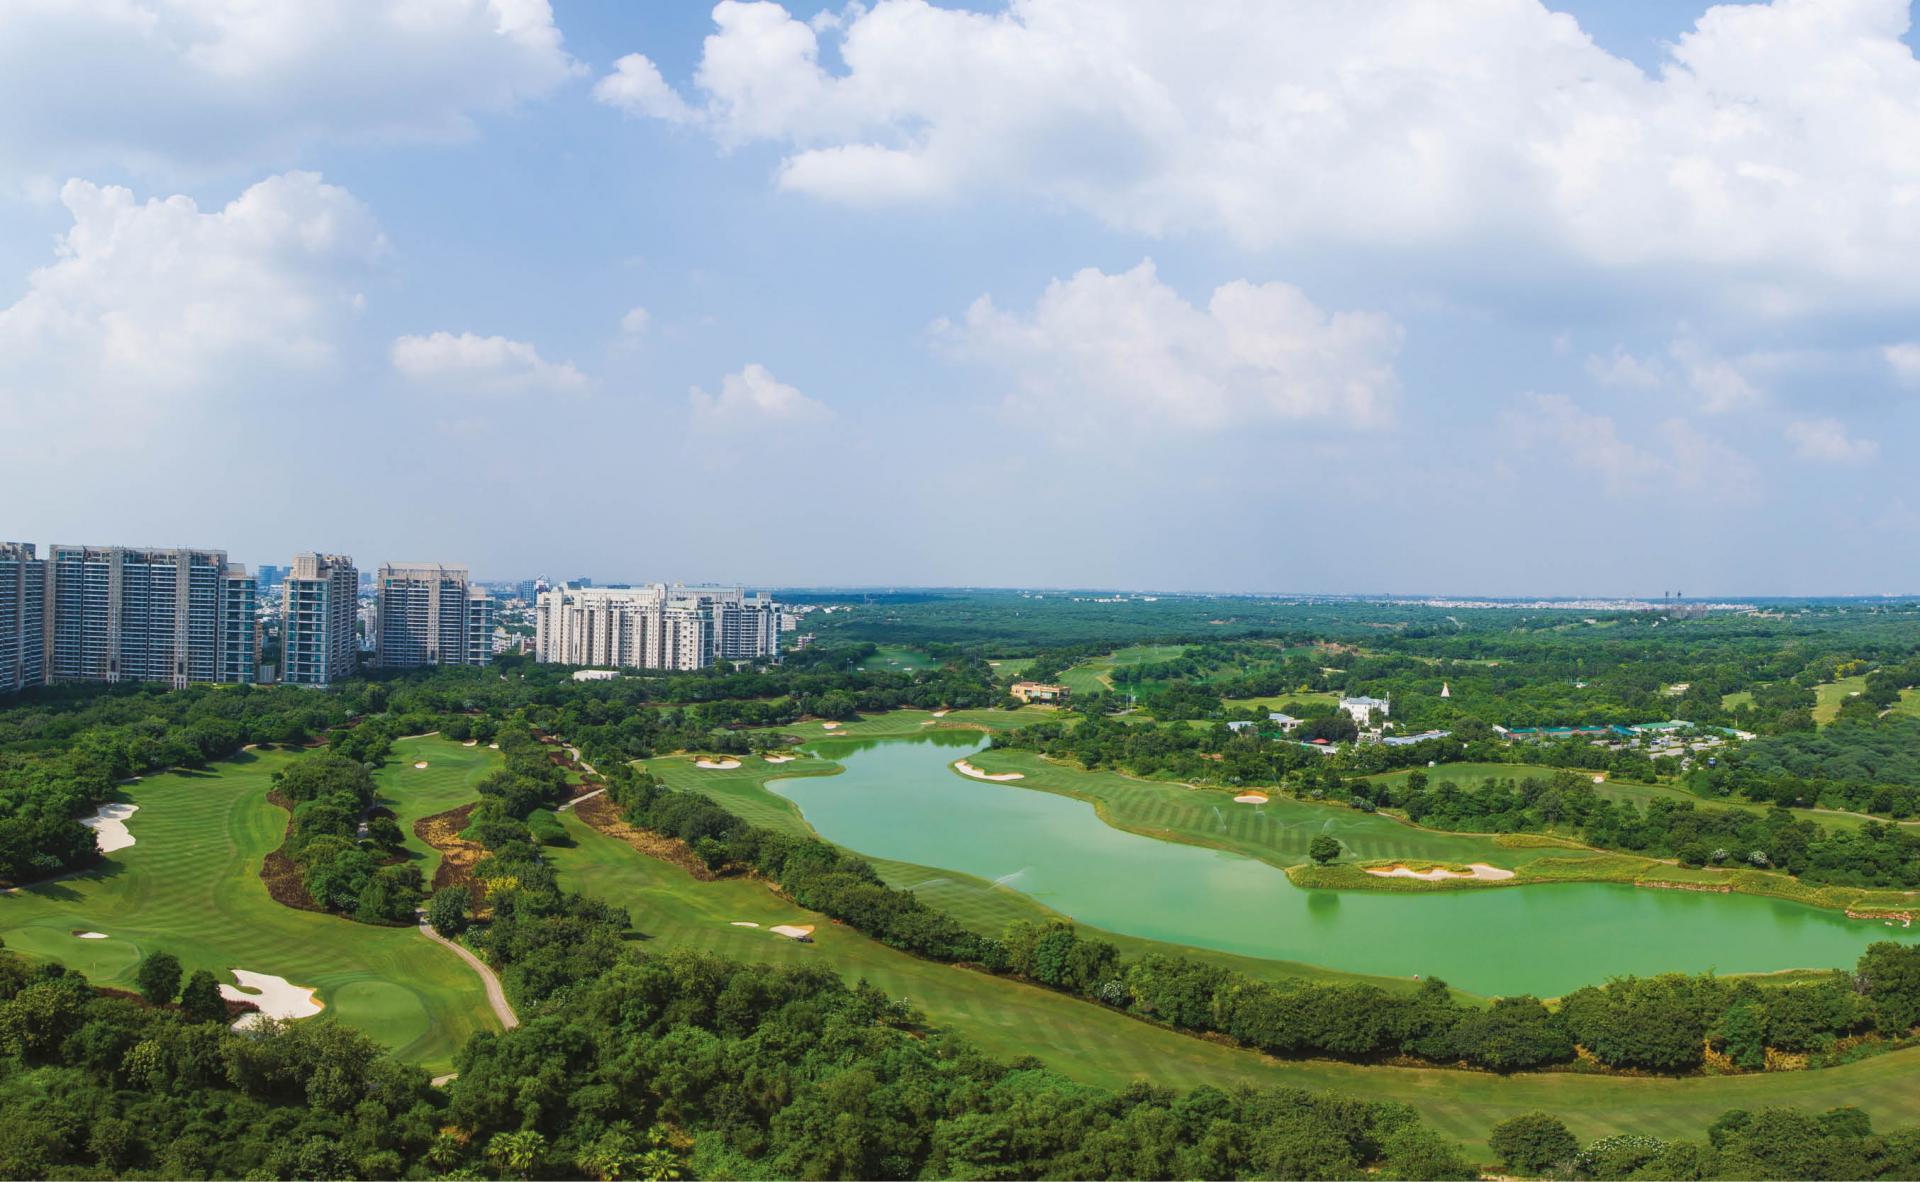 An Enclave of Luxury Nestled in a Golf Course in India